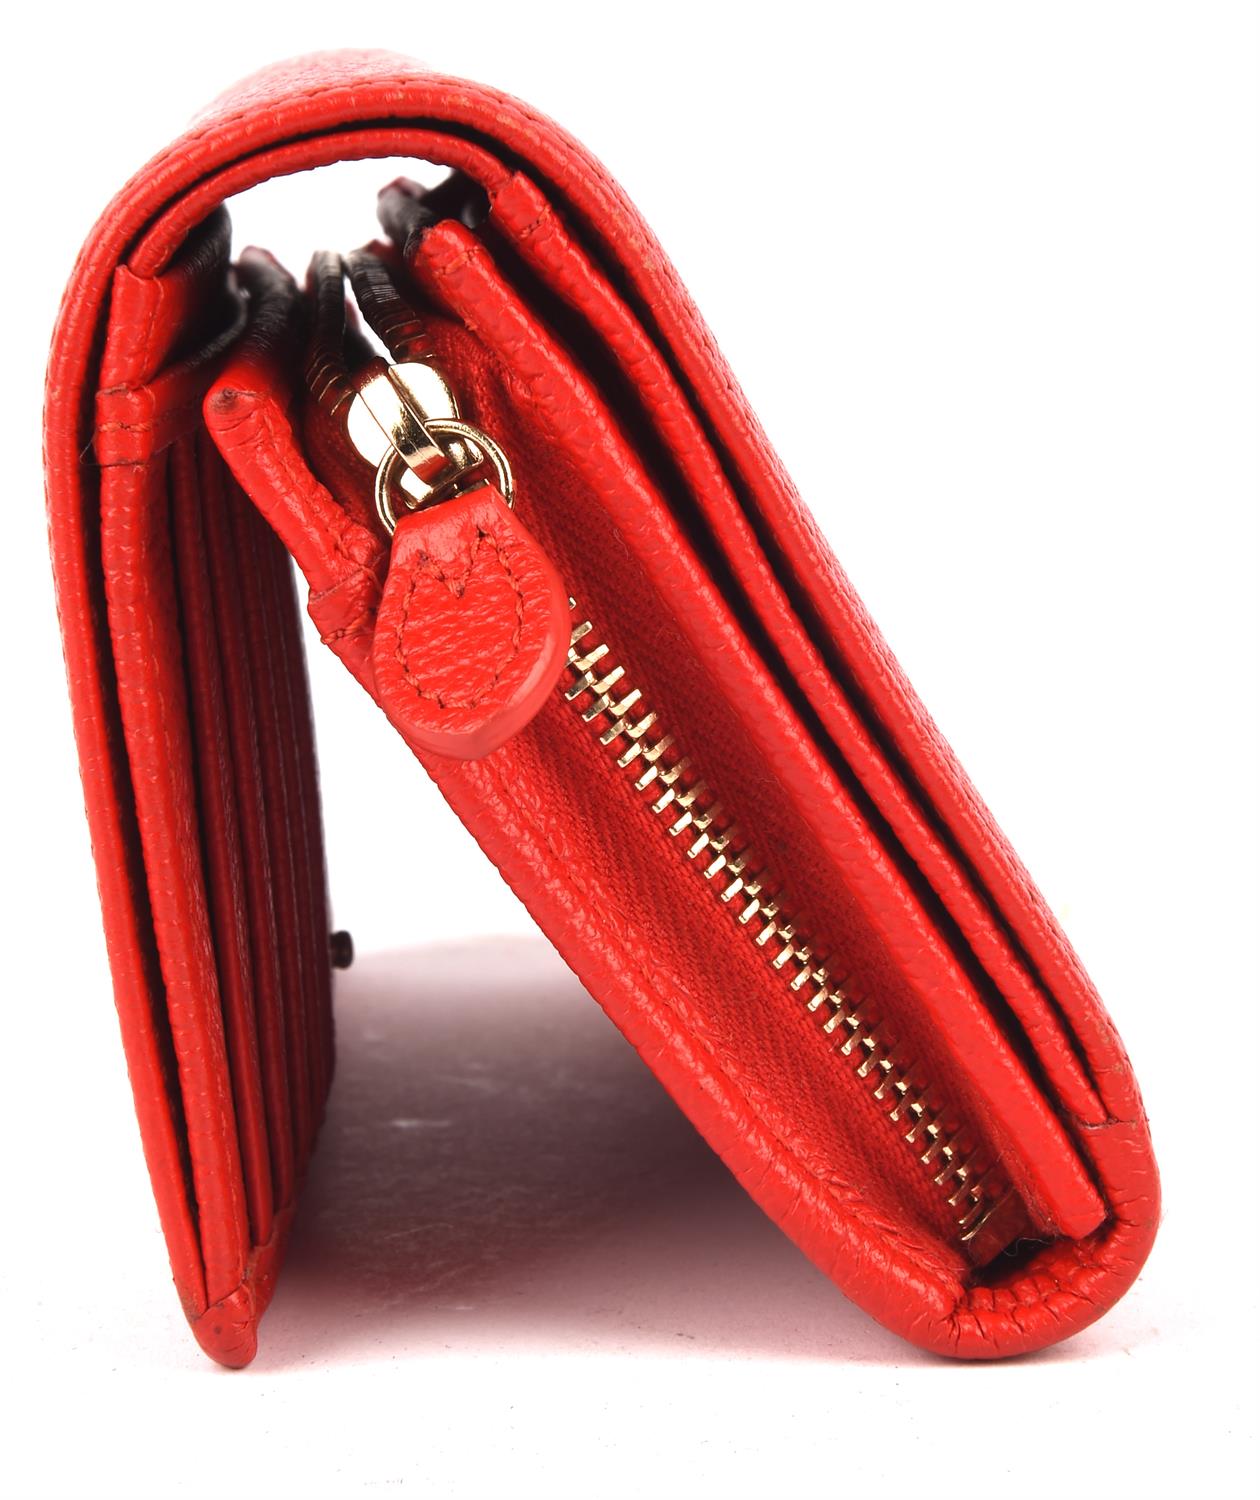 AMMENDED DESCRIPTION * MULBERRY boxed red leather bi-fold purse with brass hardware. - Image 4 of 5